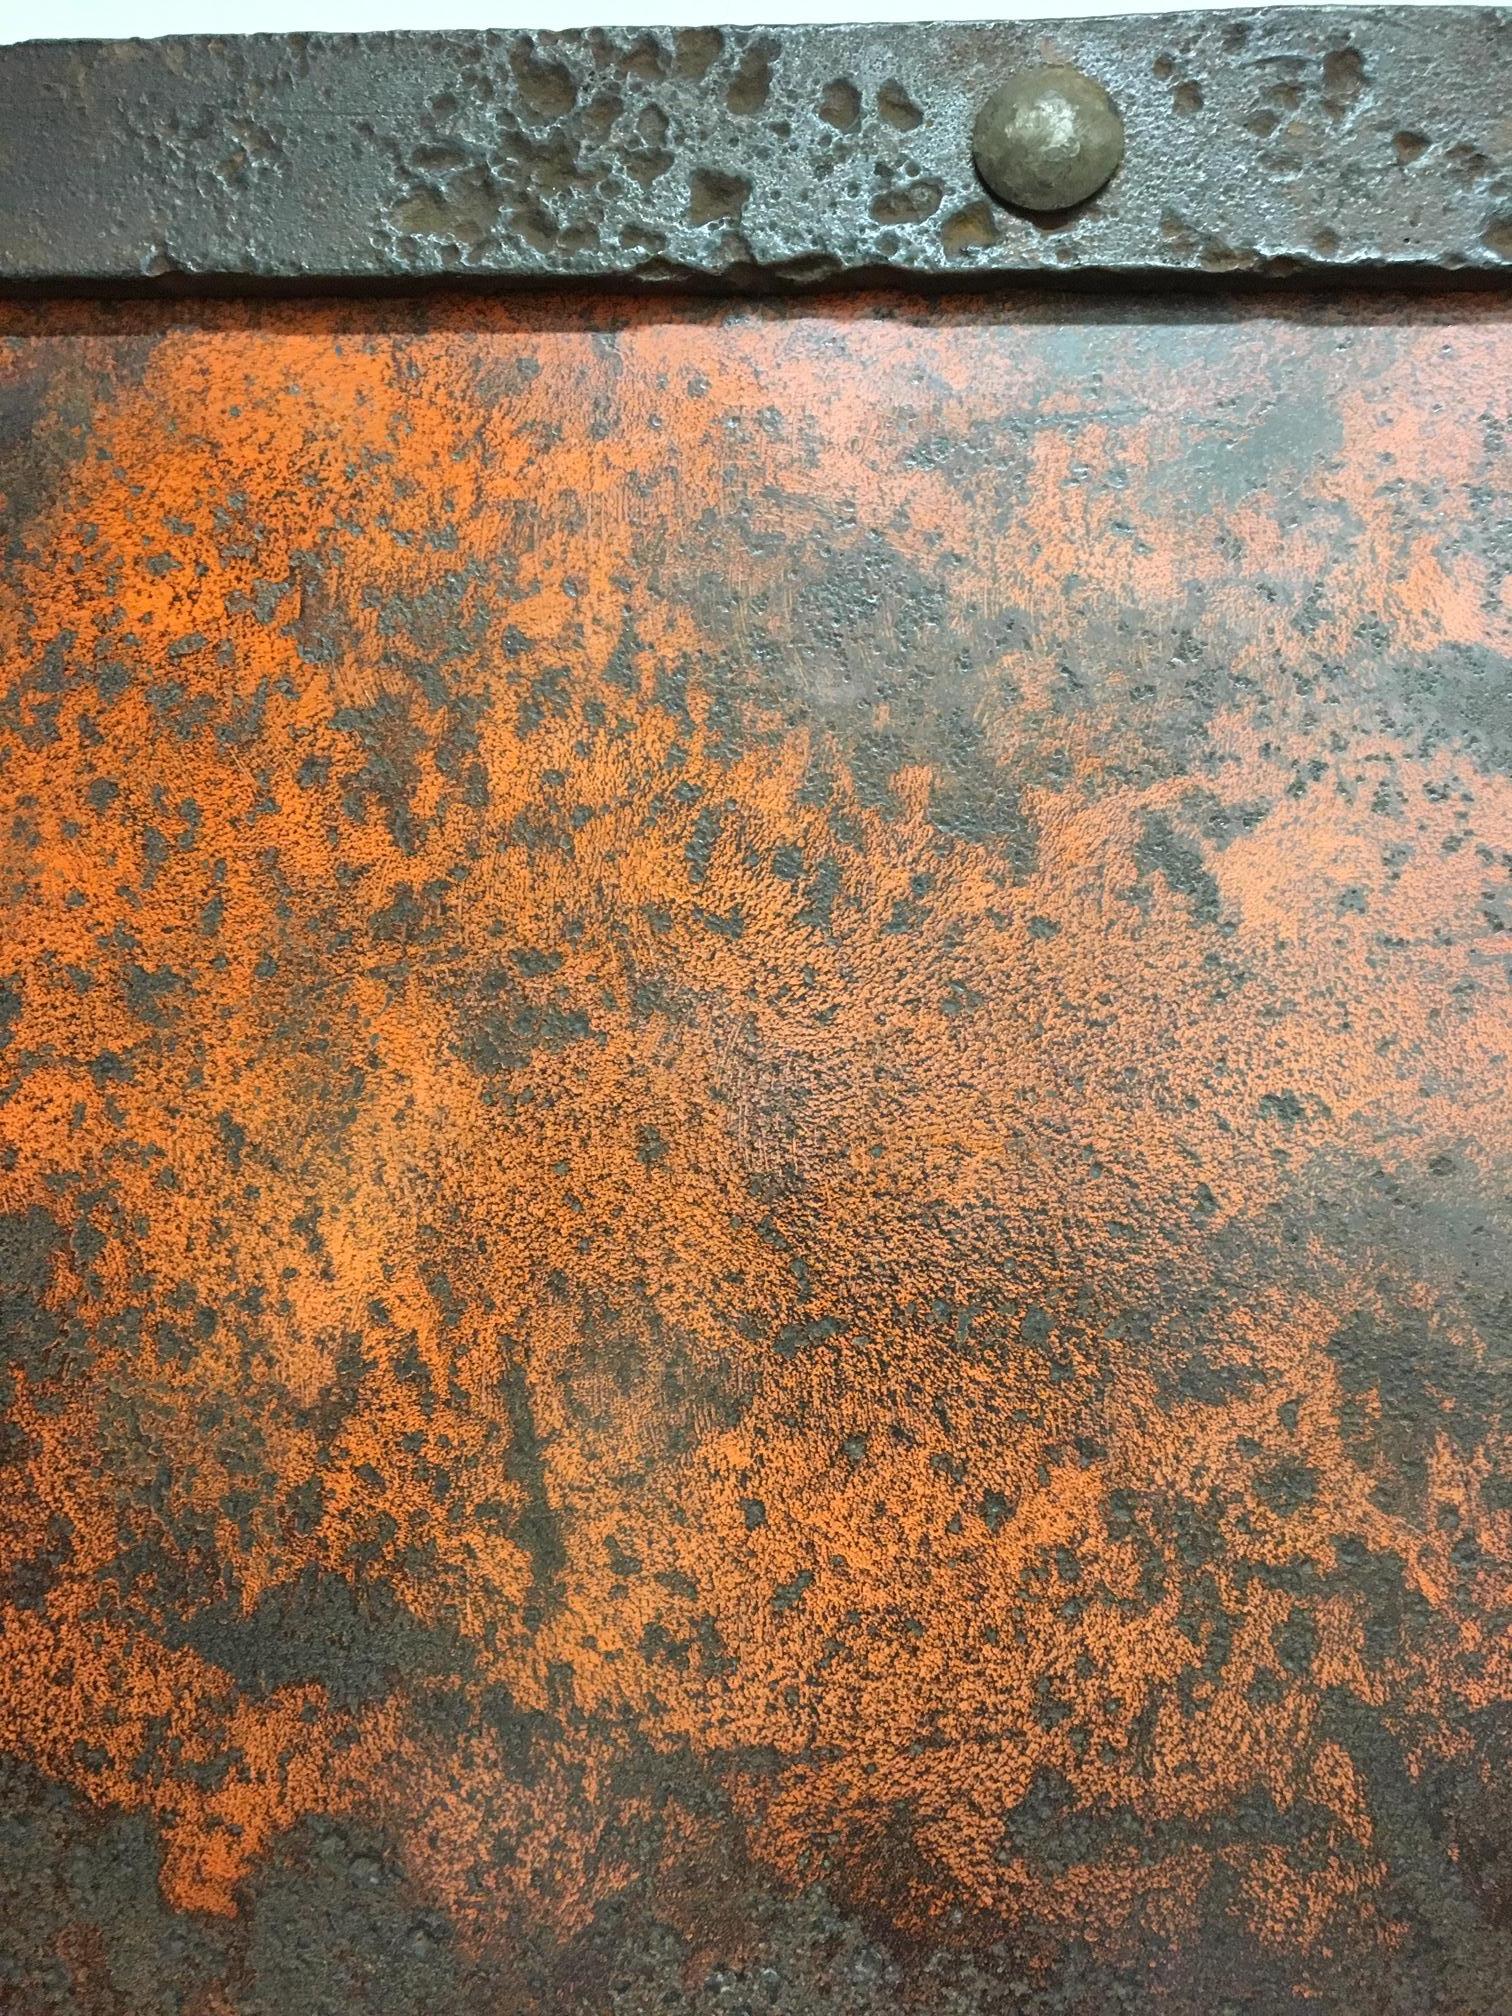 Orange Crush
steel
34 x 79 in.

Artist Statement

I seldom use stock material, but prefer distressed and rusted steel that has been scarred, bent, and made imperfect. In this state, the material becomes quite beautiful. There are figurative elements